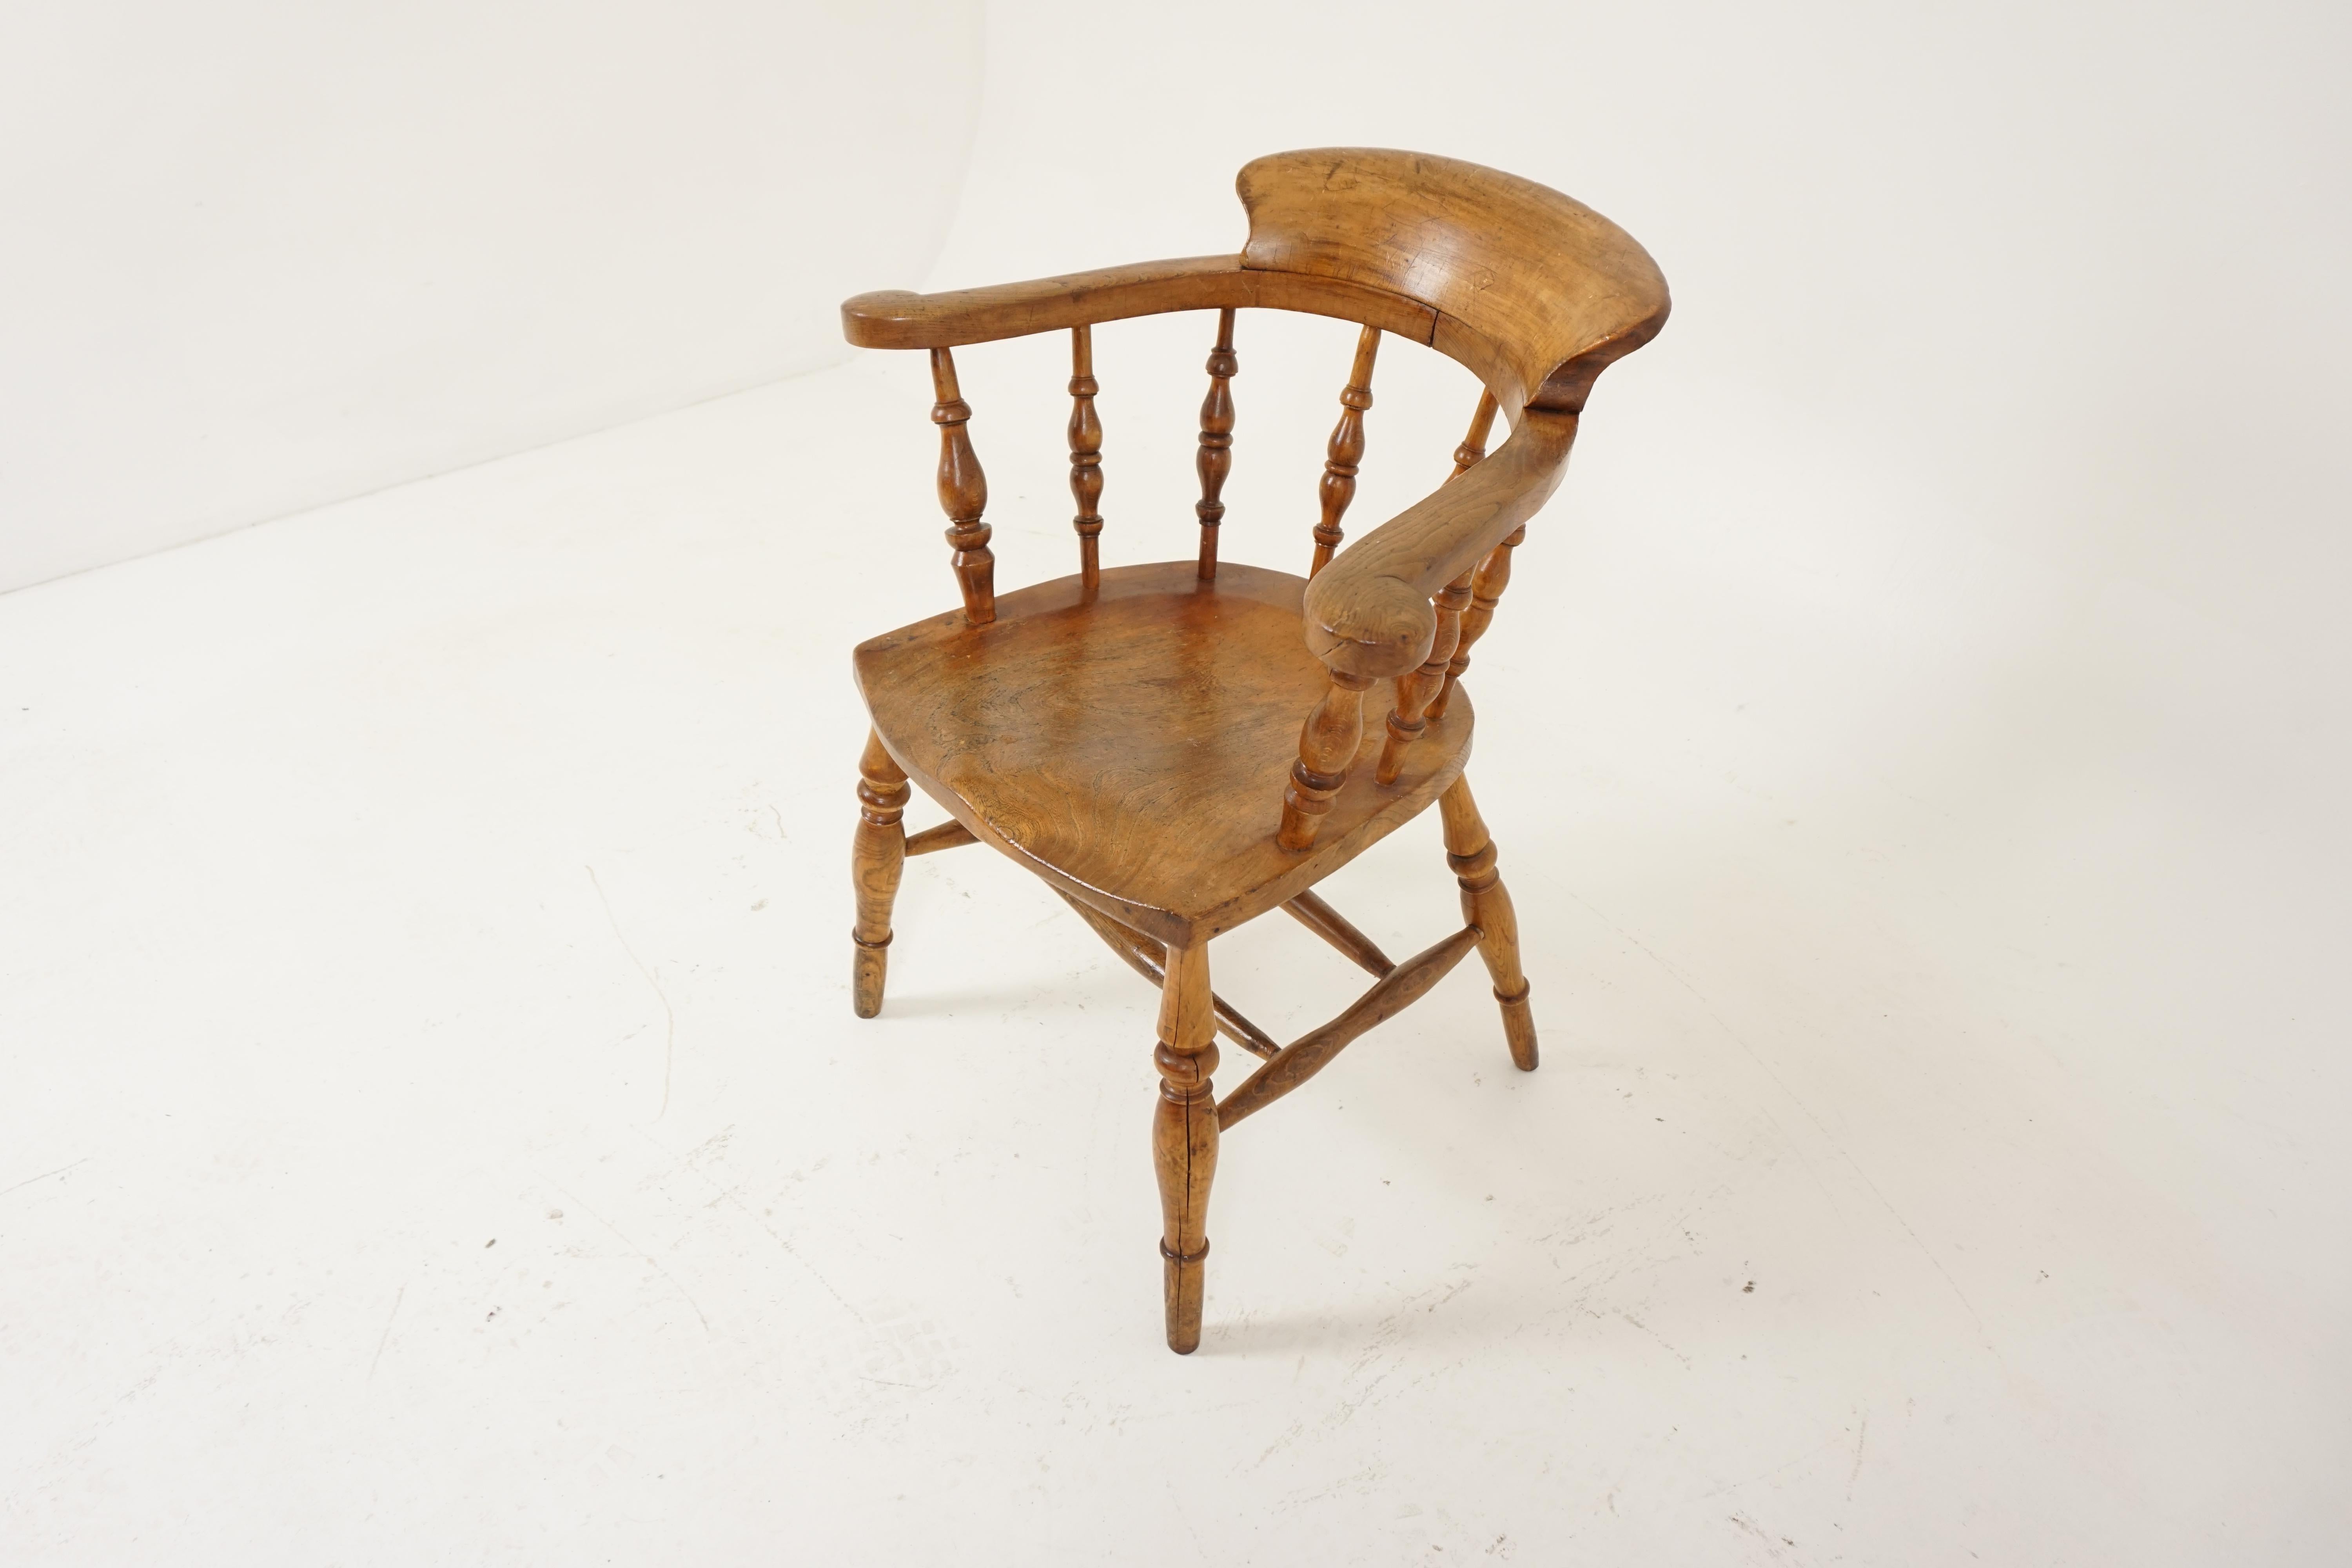 Antique Victorian, elm Windsor, smokers bow armchair, Scotland 1880, H110

Scotland, 1880
Solid elm
Original finish
The back crowned with a generous scroll back
Thick shaped saddle seat below
Ring turned spindles rise obliquely
Supporting the